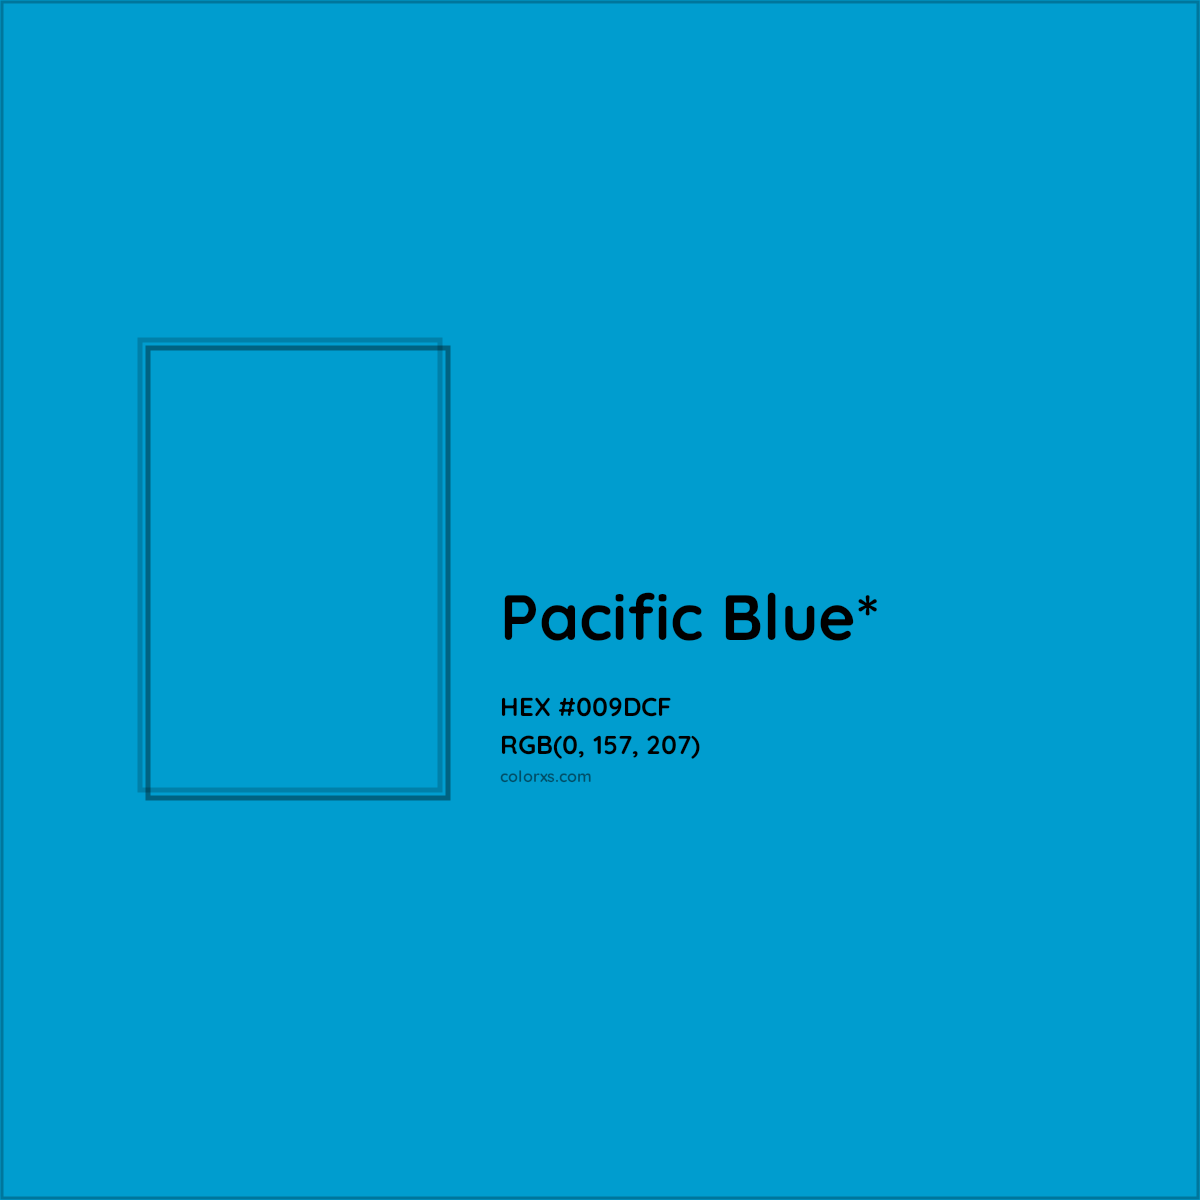 colorswall on X: Shades of Pacific Blue color #009DC4 hex #009dc4,  #008db0, #007e9d, #006e89, #005e76, #004f62, #003f4e, #002f3b, #001f27,  #001014 #colors #palette   /  X